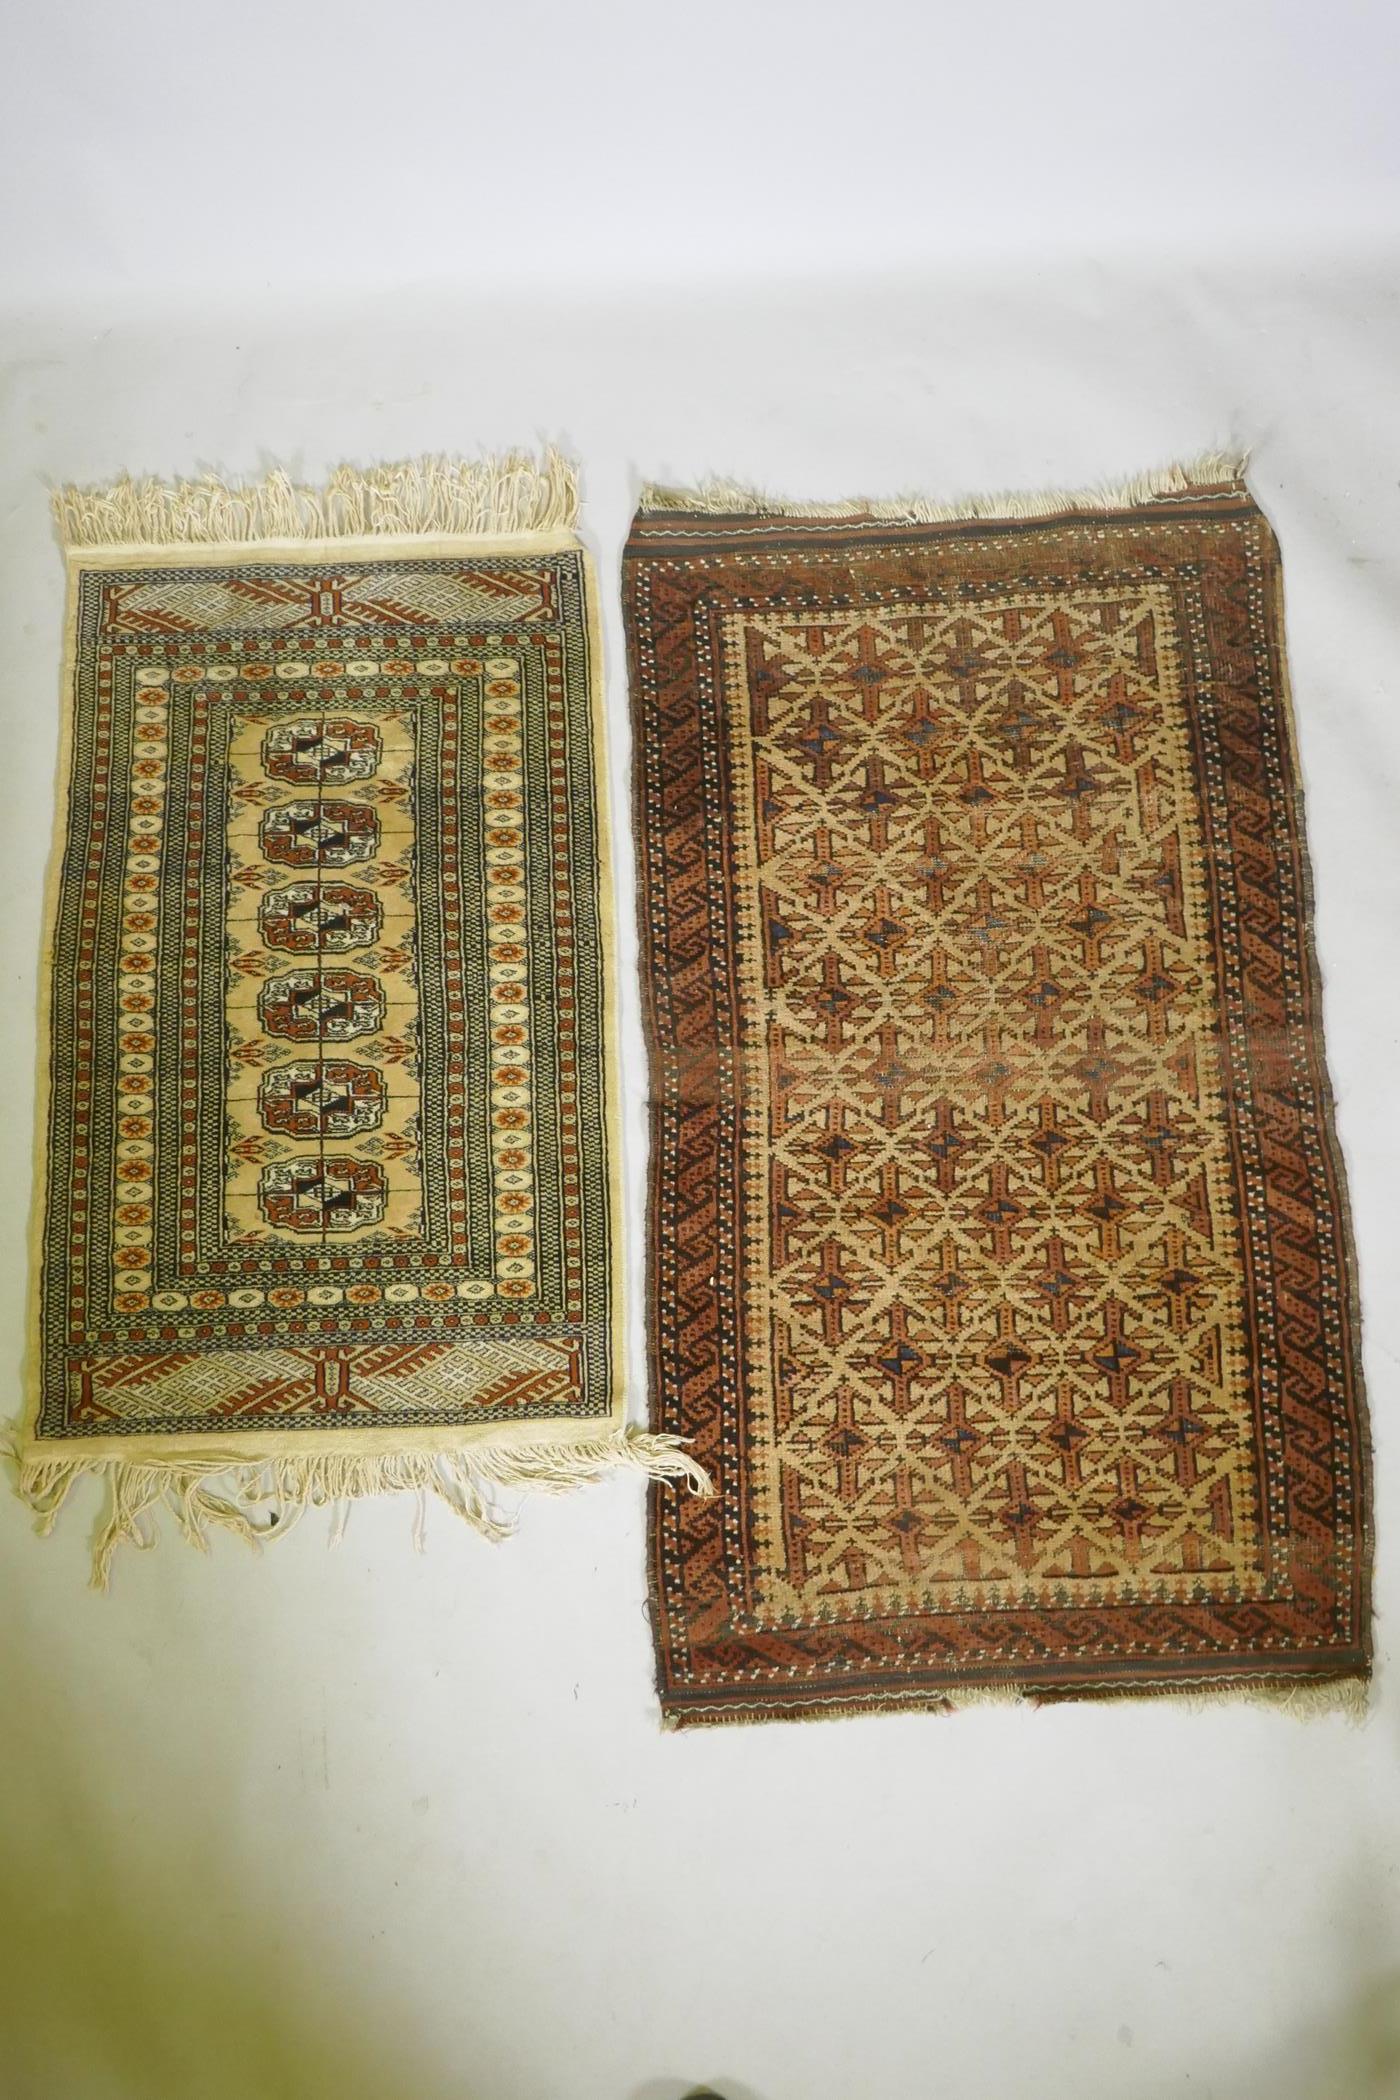 A gold ground Bokhara rug, and an Iranian rust and cream ground wool rug with an allover geometric